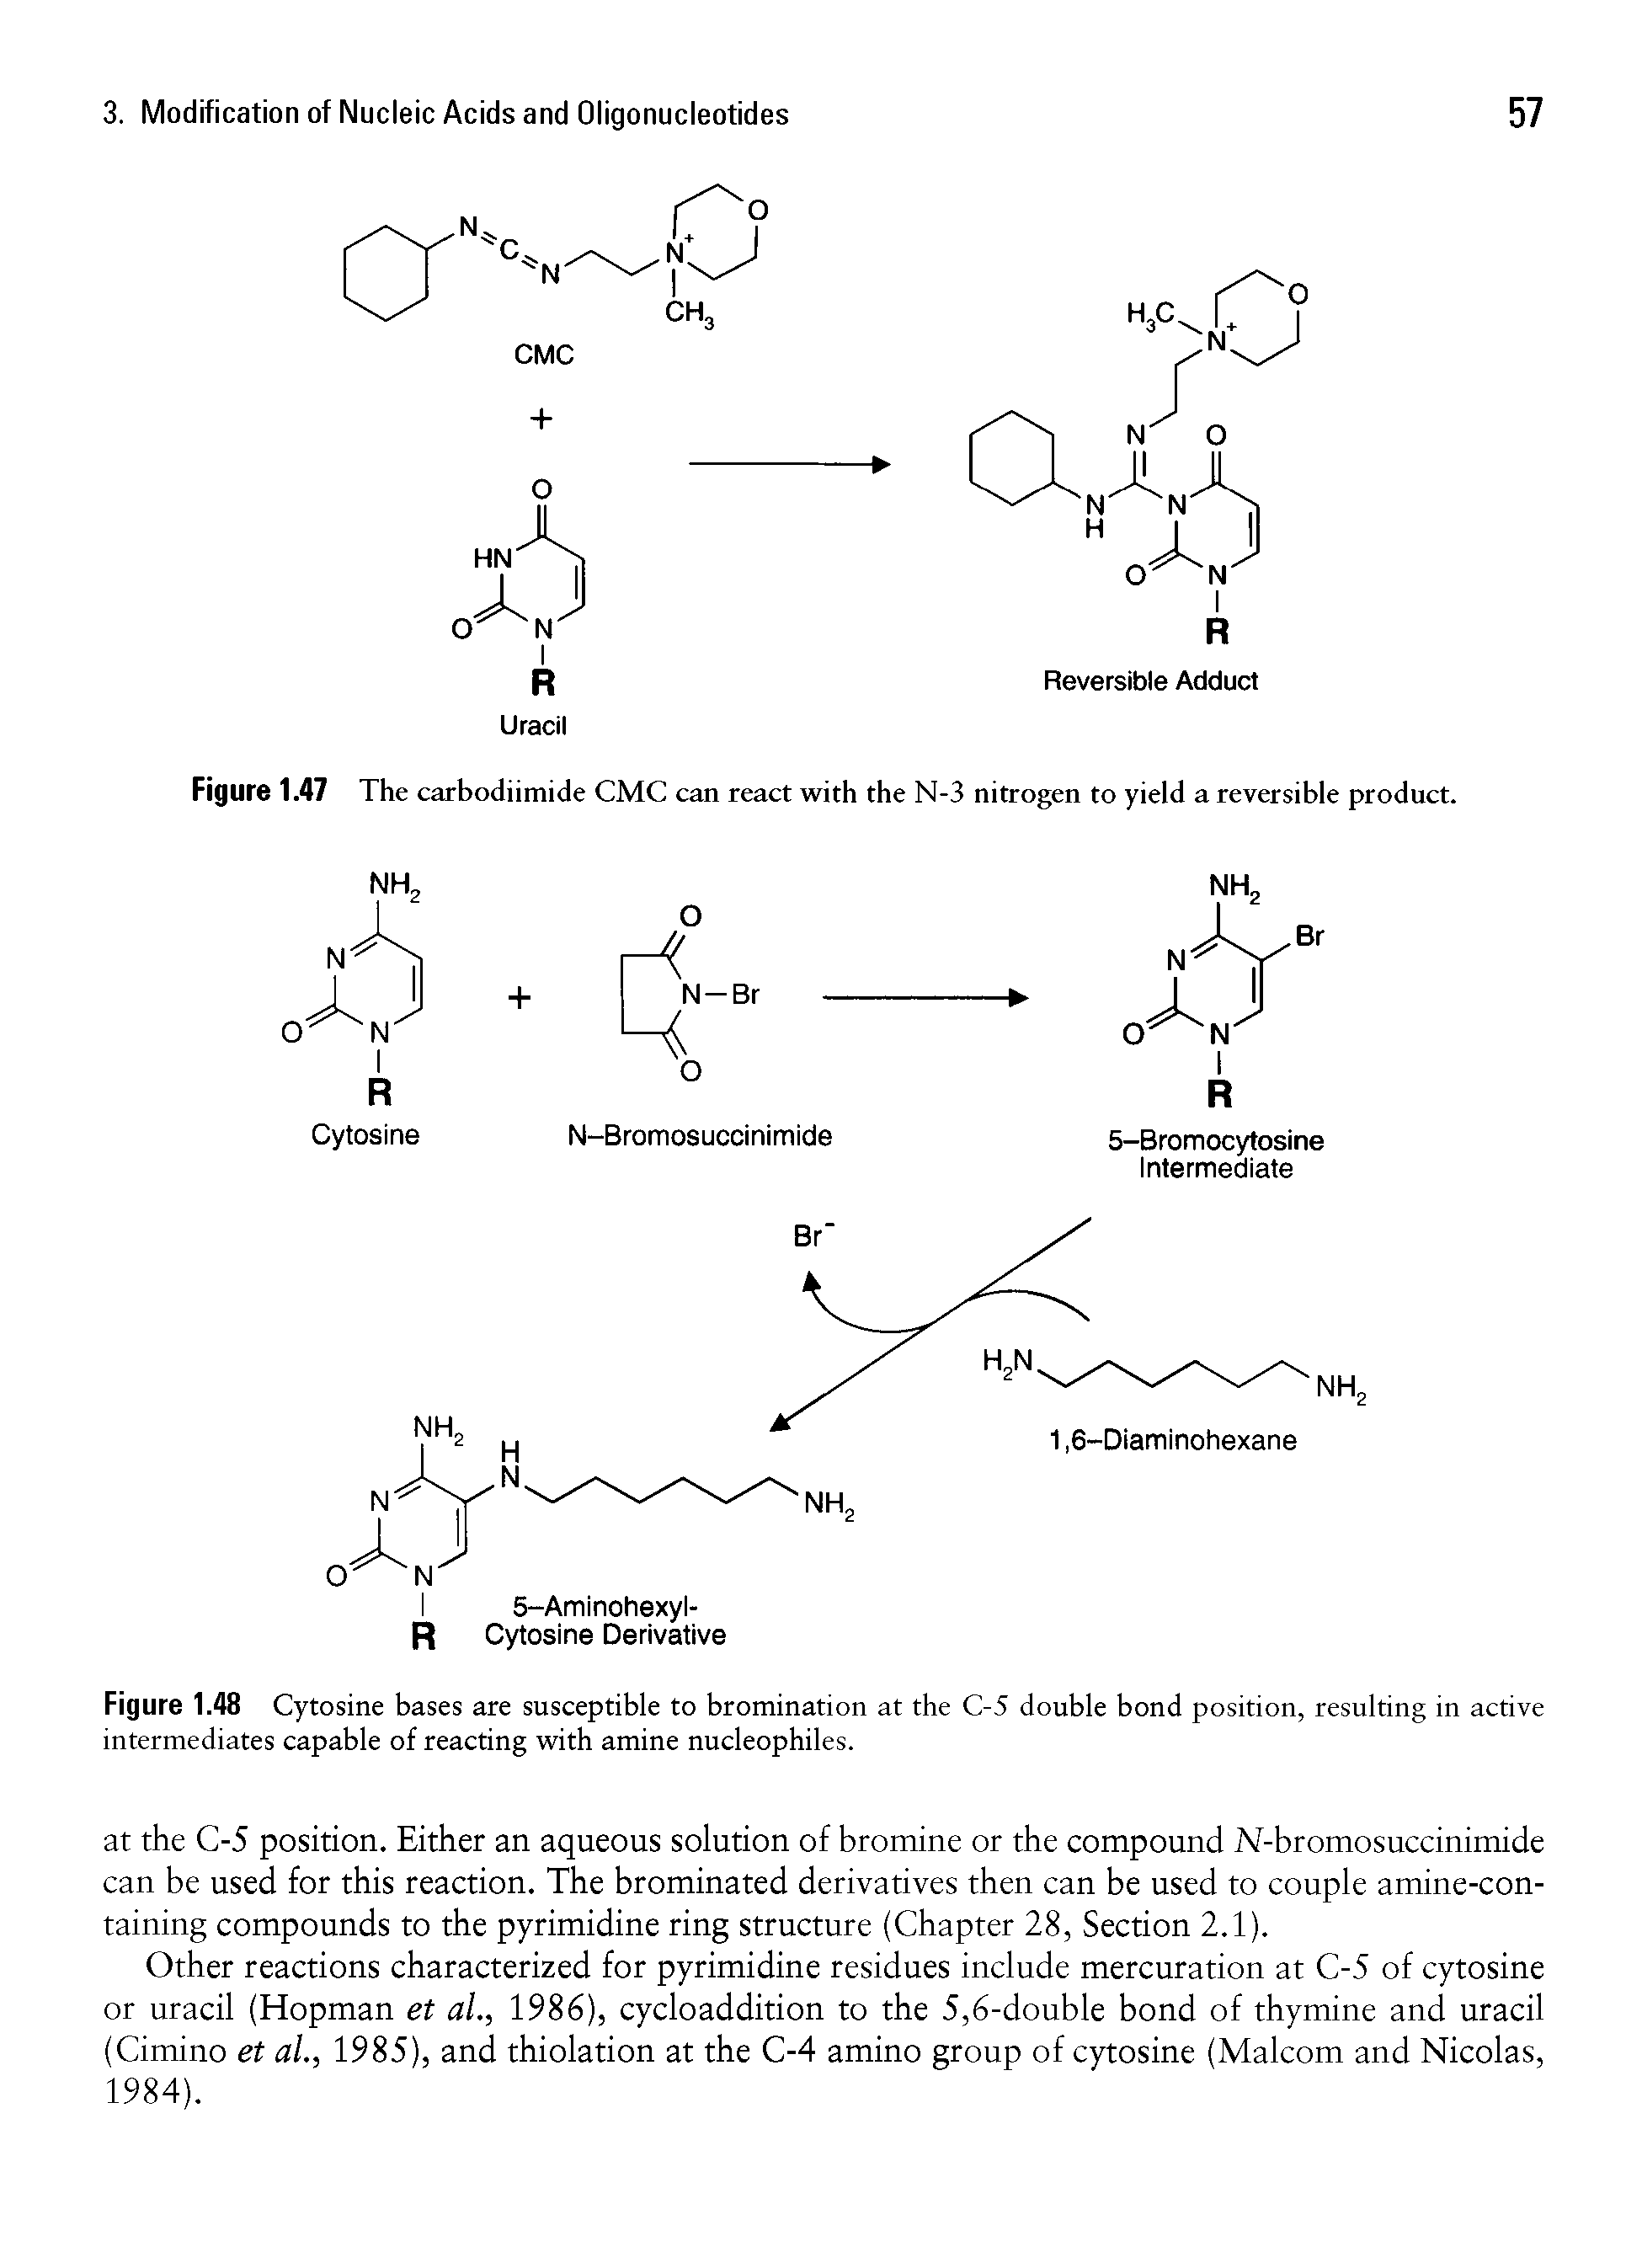 Figure 1.48 Cytosine bases are susceptible to bromination at the C-5 double bond position, resulting in active intermediates capable of reacting with amine nucleophiles.